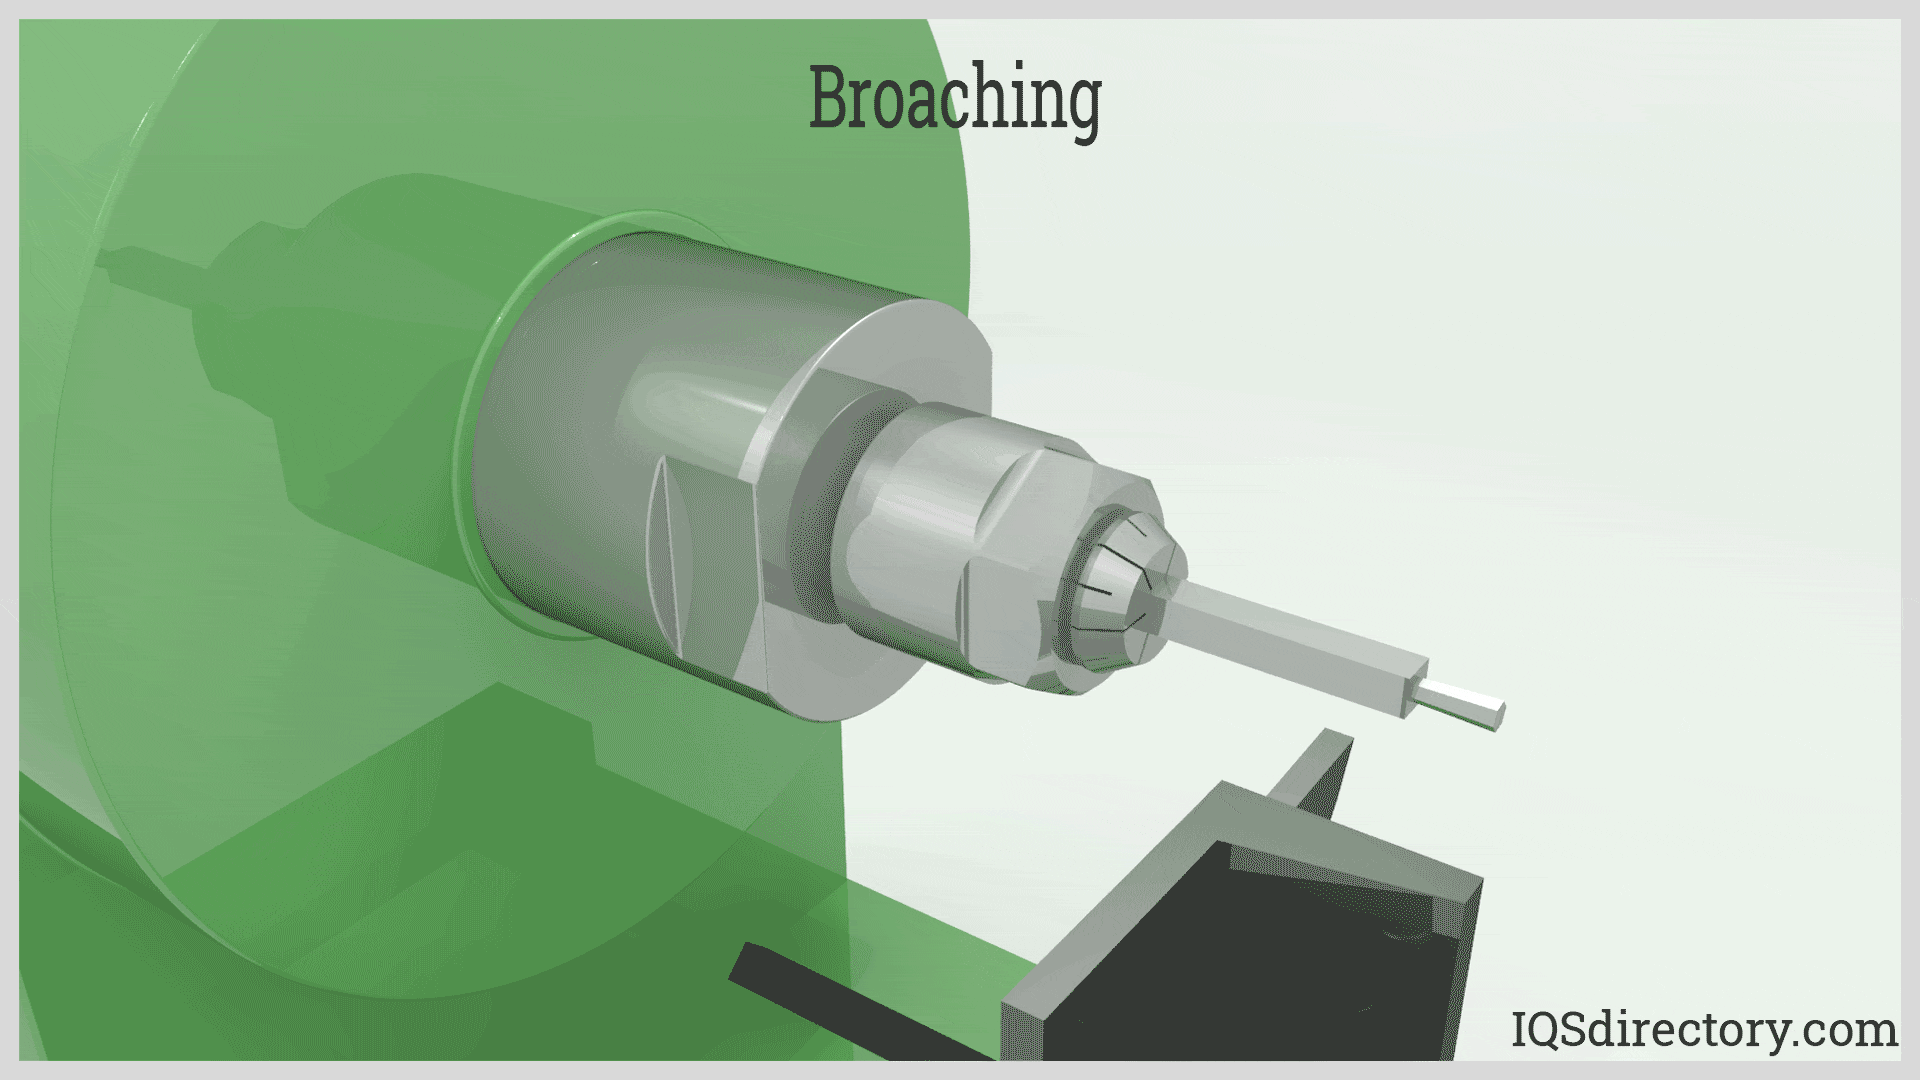 Broaching: What Is It? How Does It Work? Types, Products